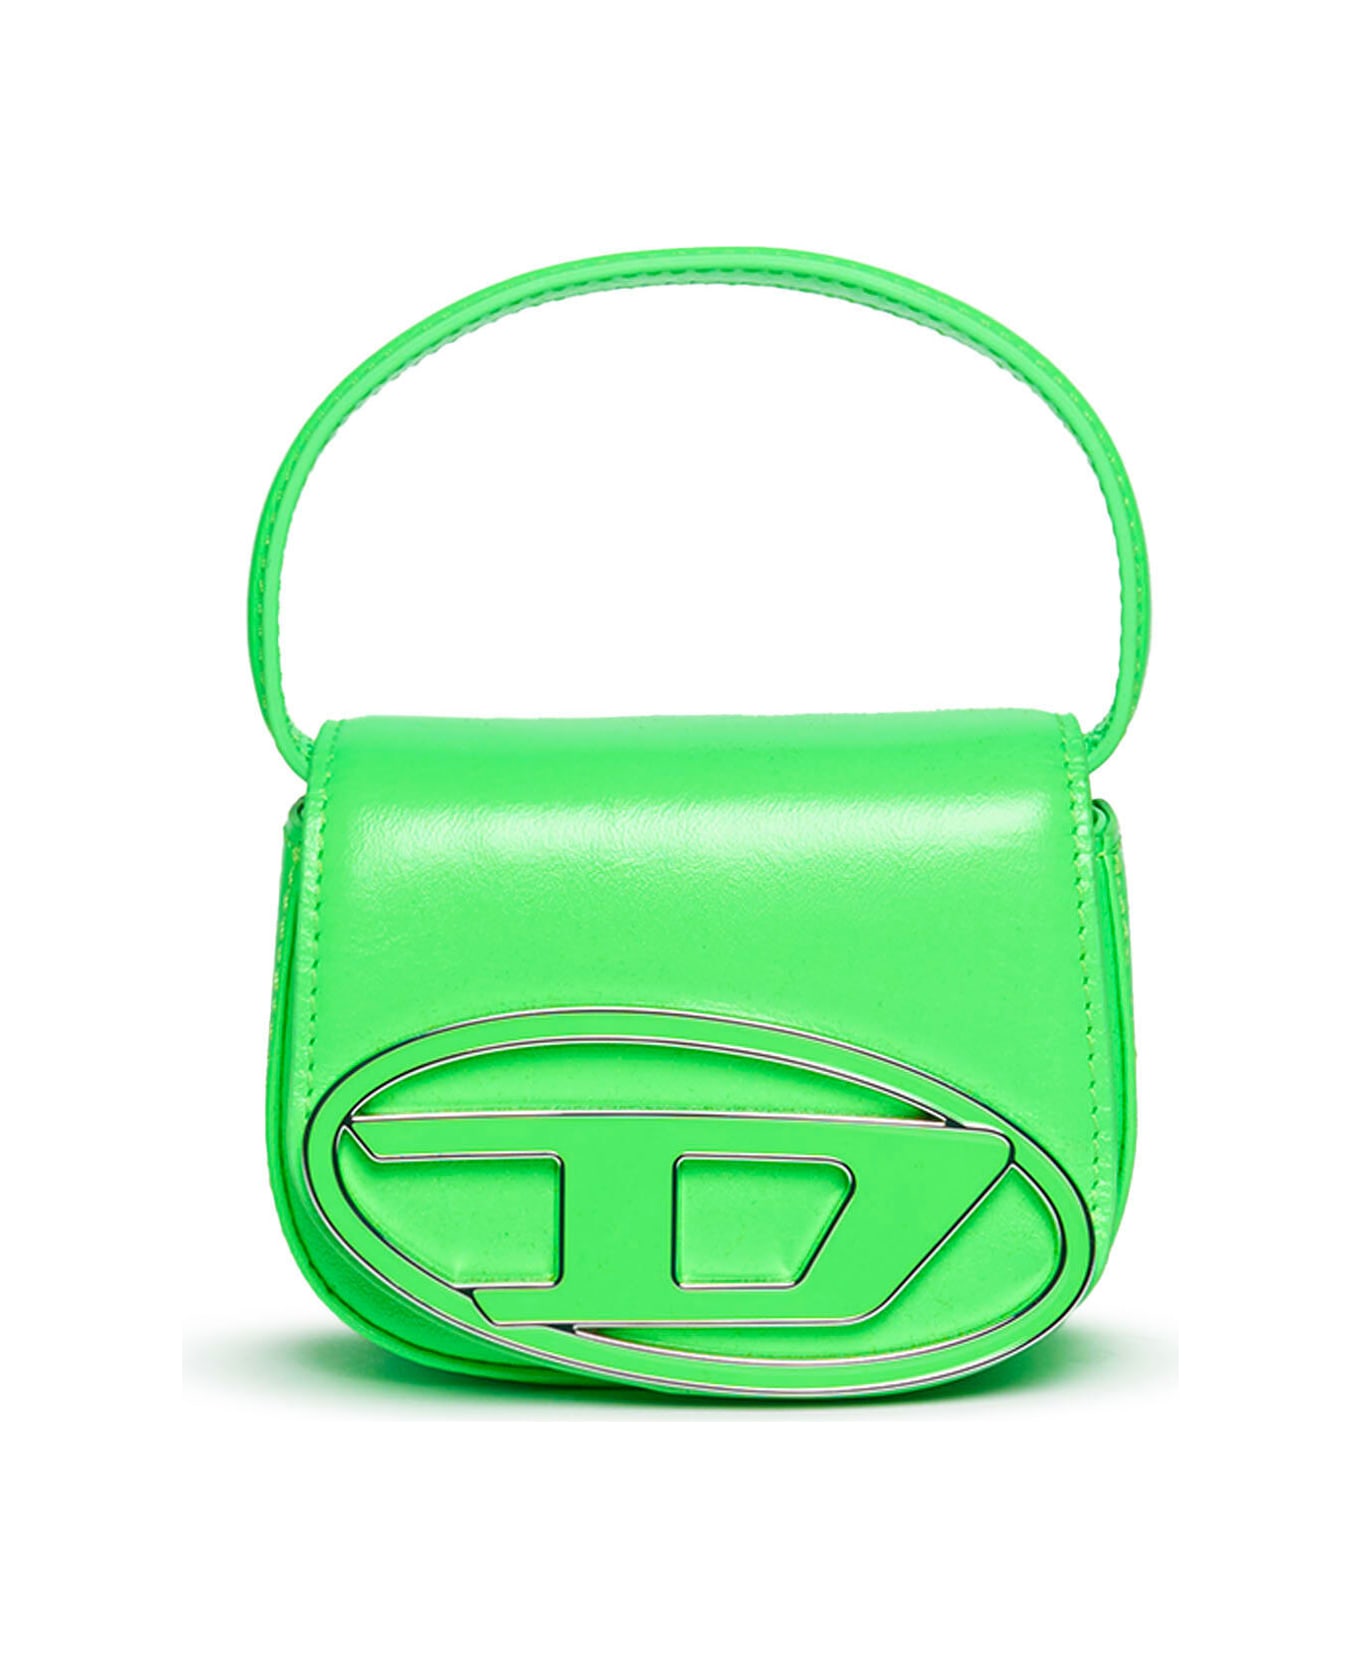 Diesel 1dr Xs Bags Diesel 1dr Xs Bag In Fluo Imitation Leather